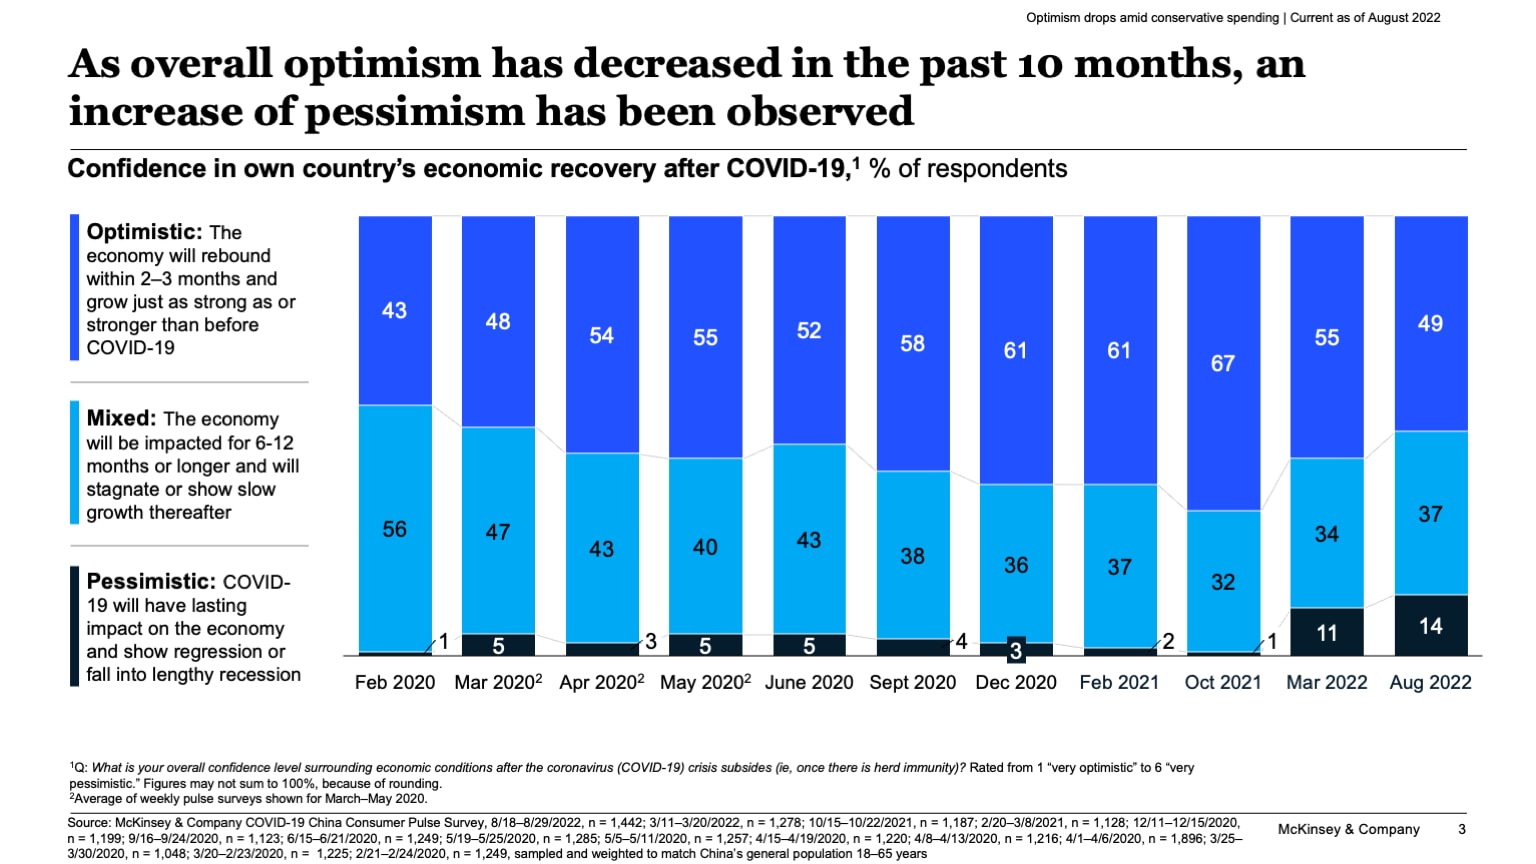 As overall optimism has decreased in the past 10 months, an increase of pessimism has been observed